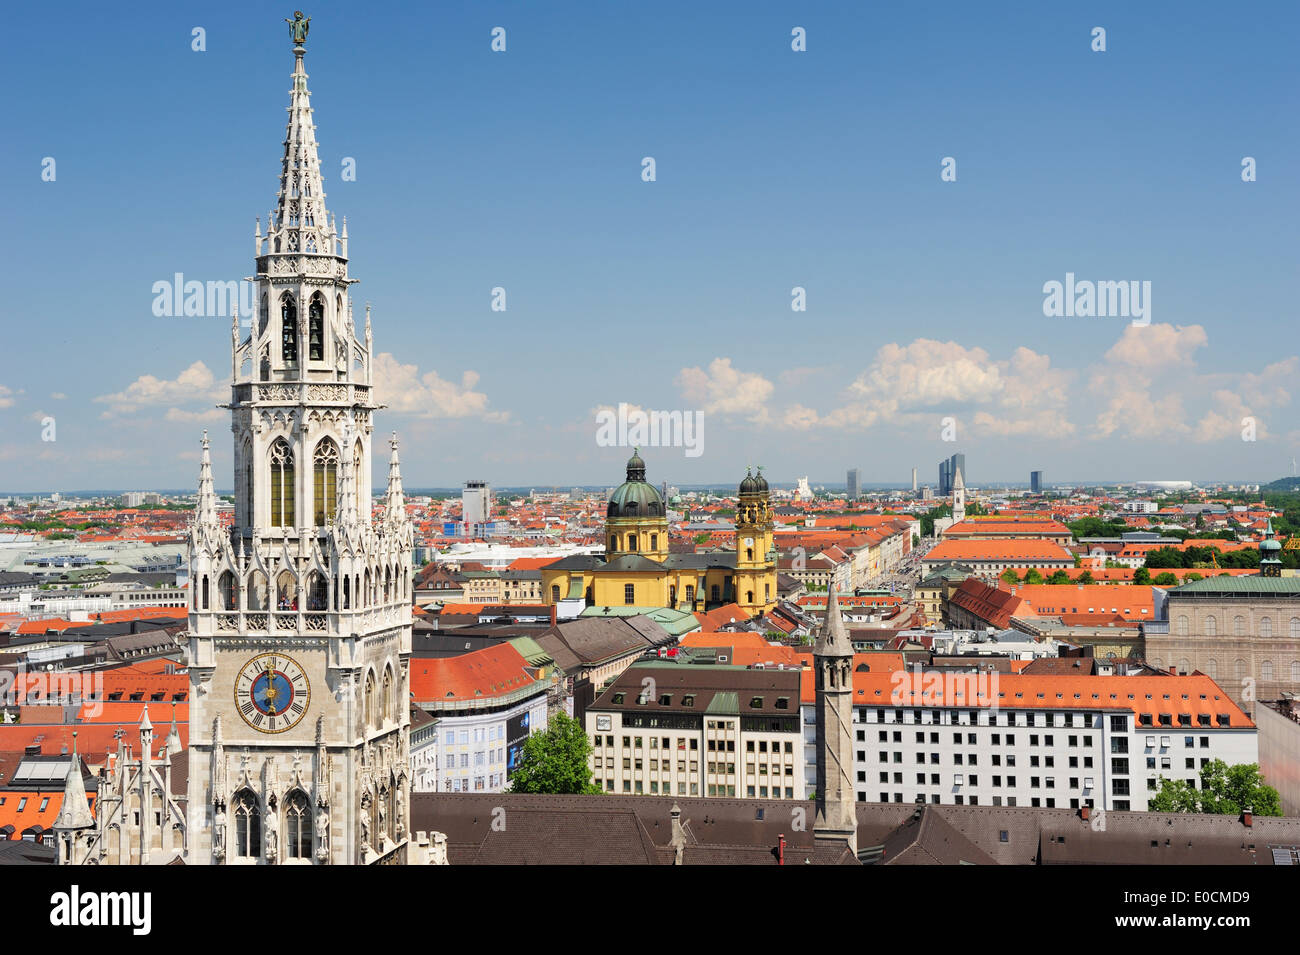 View to city of Munich with town hall Neues Rathaus and church Theatinerkirche, Munich, Upper Bavaria, Bavaria, Germany, Europe Stock Photo